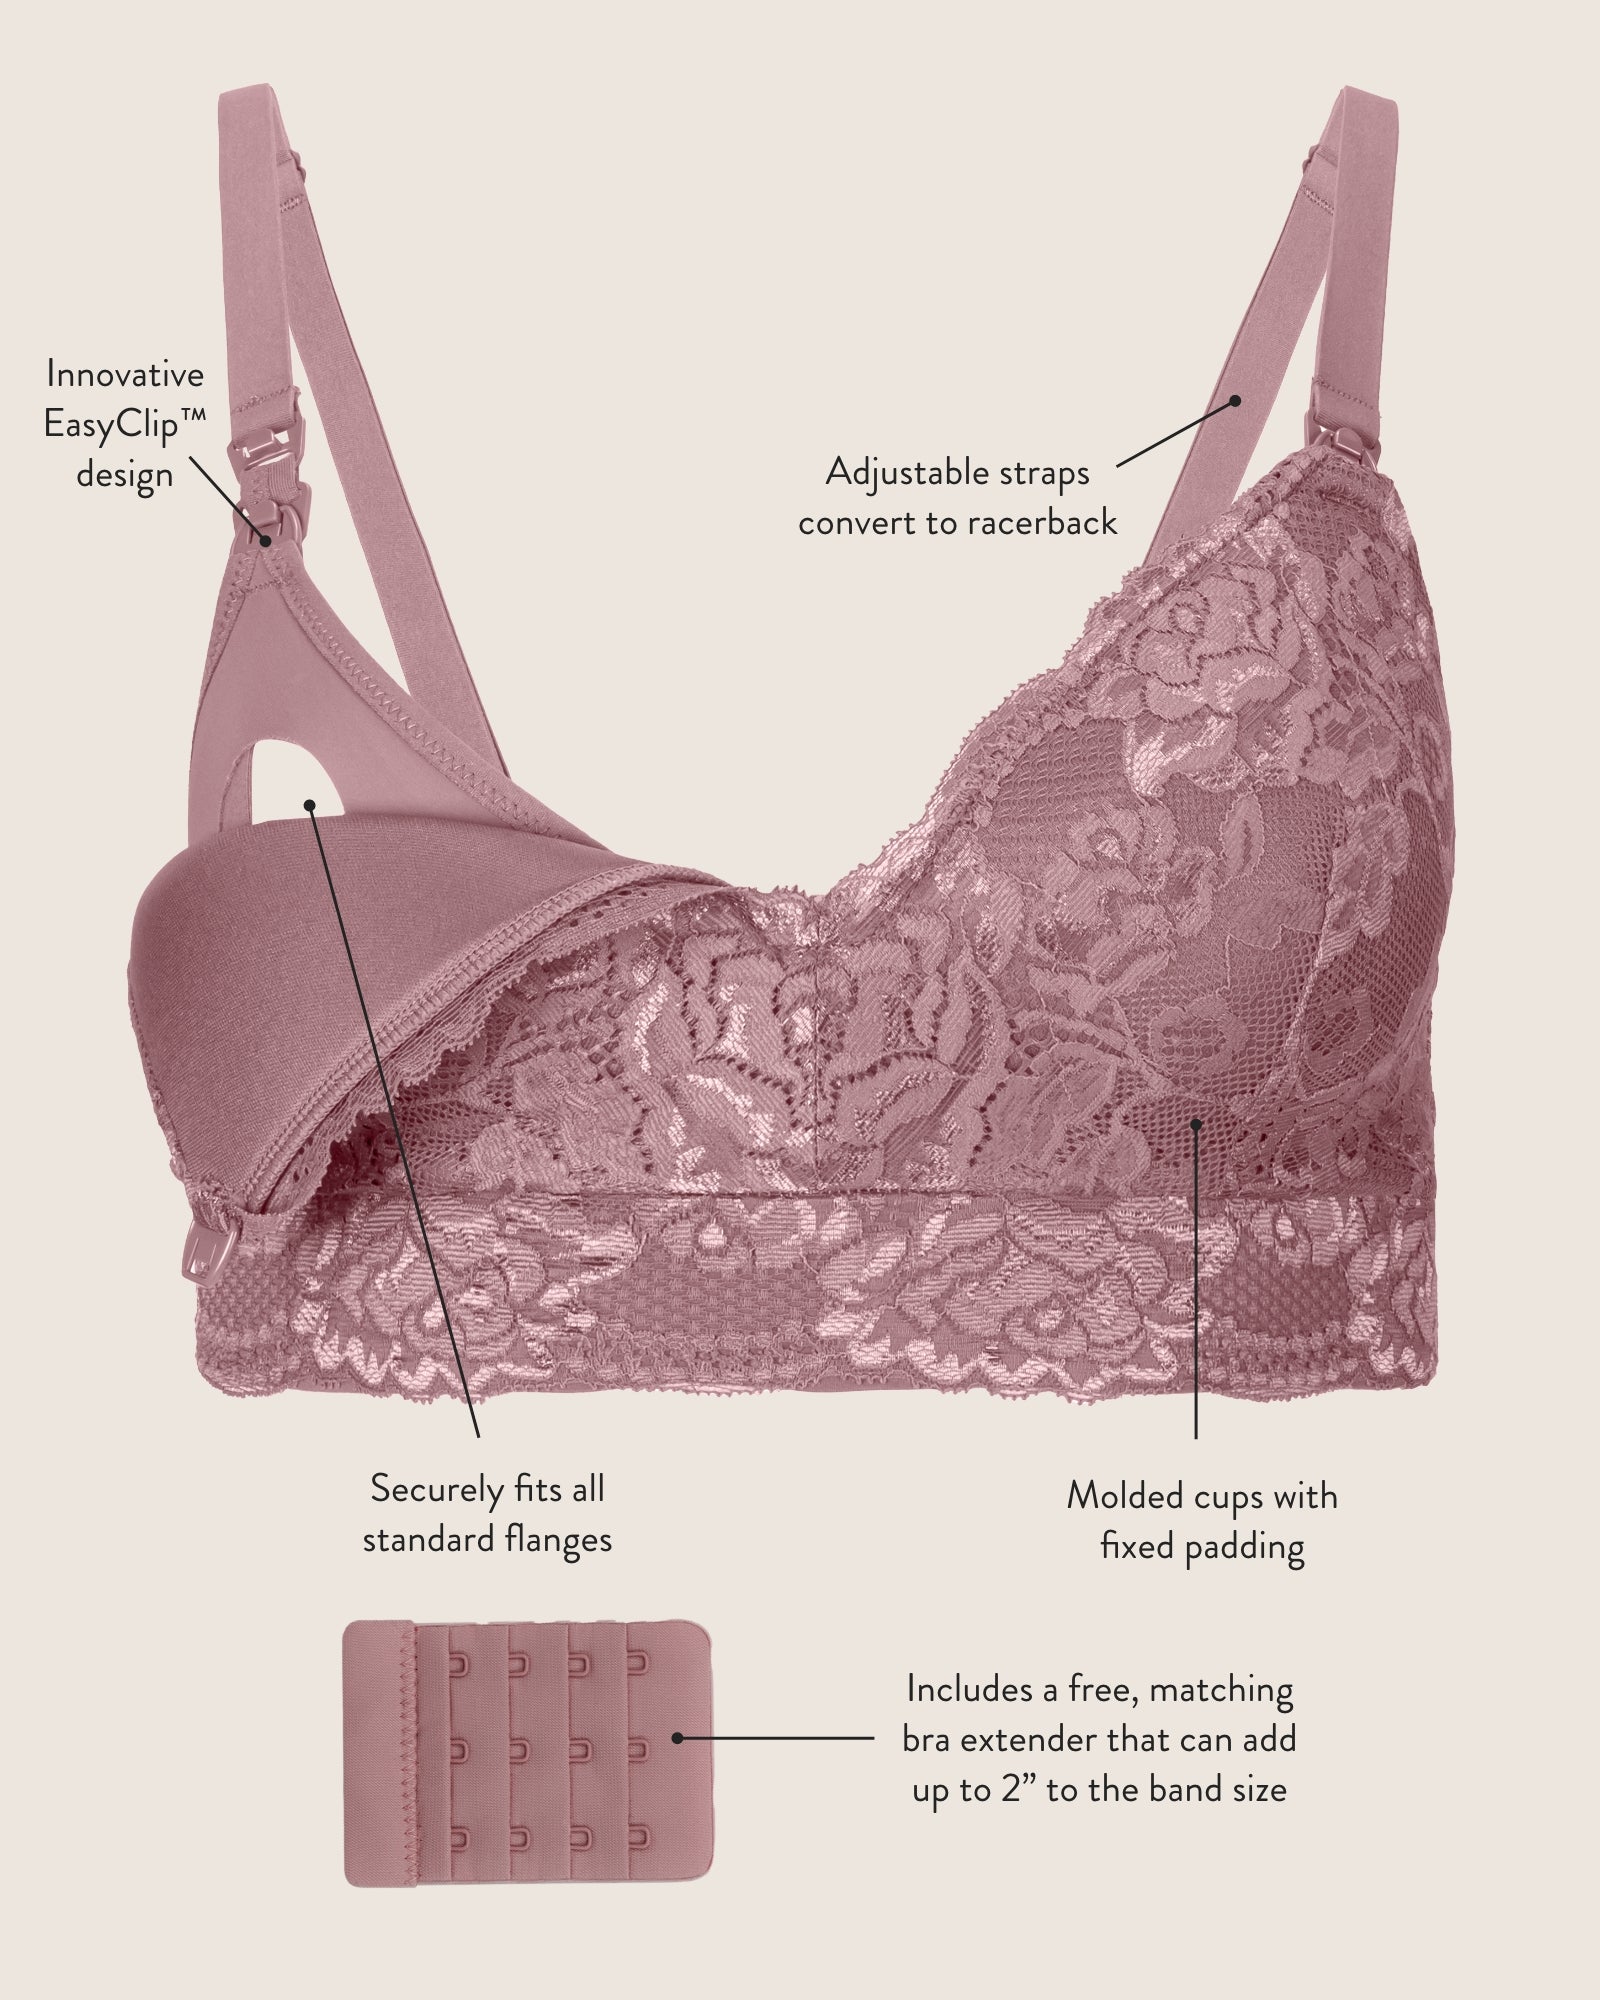 Flat image of the Lace Minimalist Hands-Free Pumping & Nursing Bra showcasing its' unique qualities: Adjustable straps that convert to racerback, EasyClip technology, flattering plunge cut, molded cups with fixed padding. 